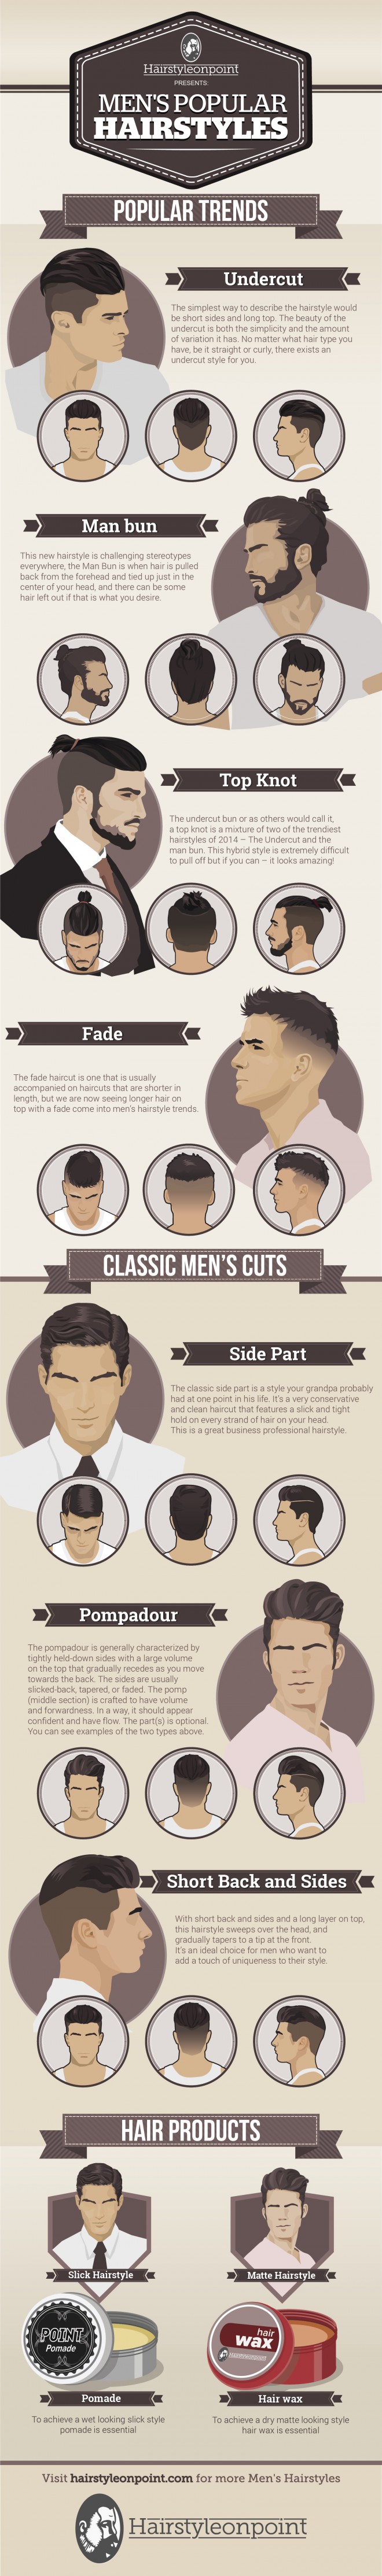 Men's Hairstyles 2015 / Source: http://hairstyleonpoint.com